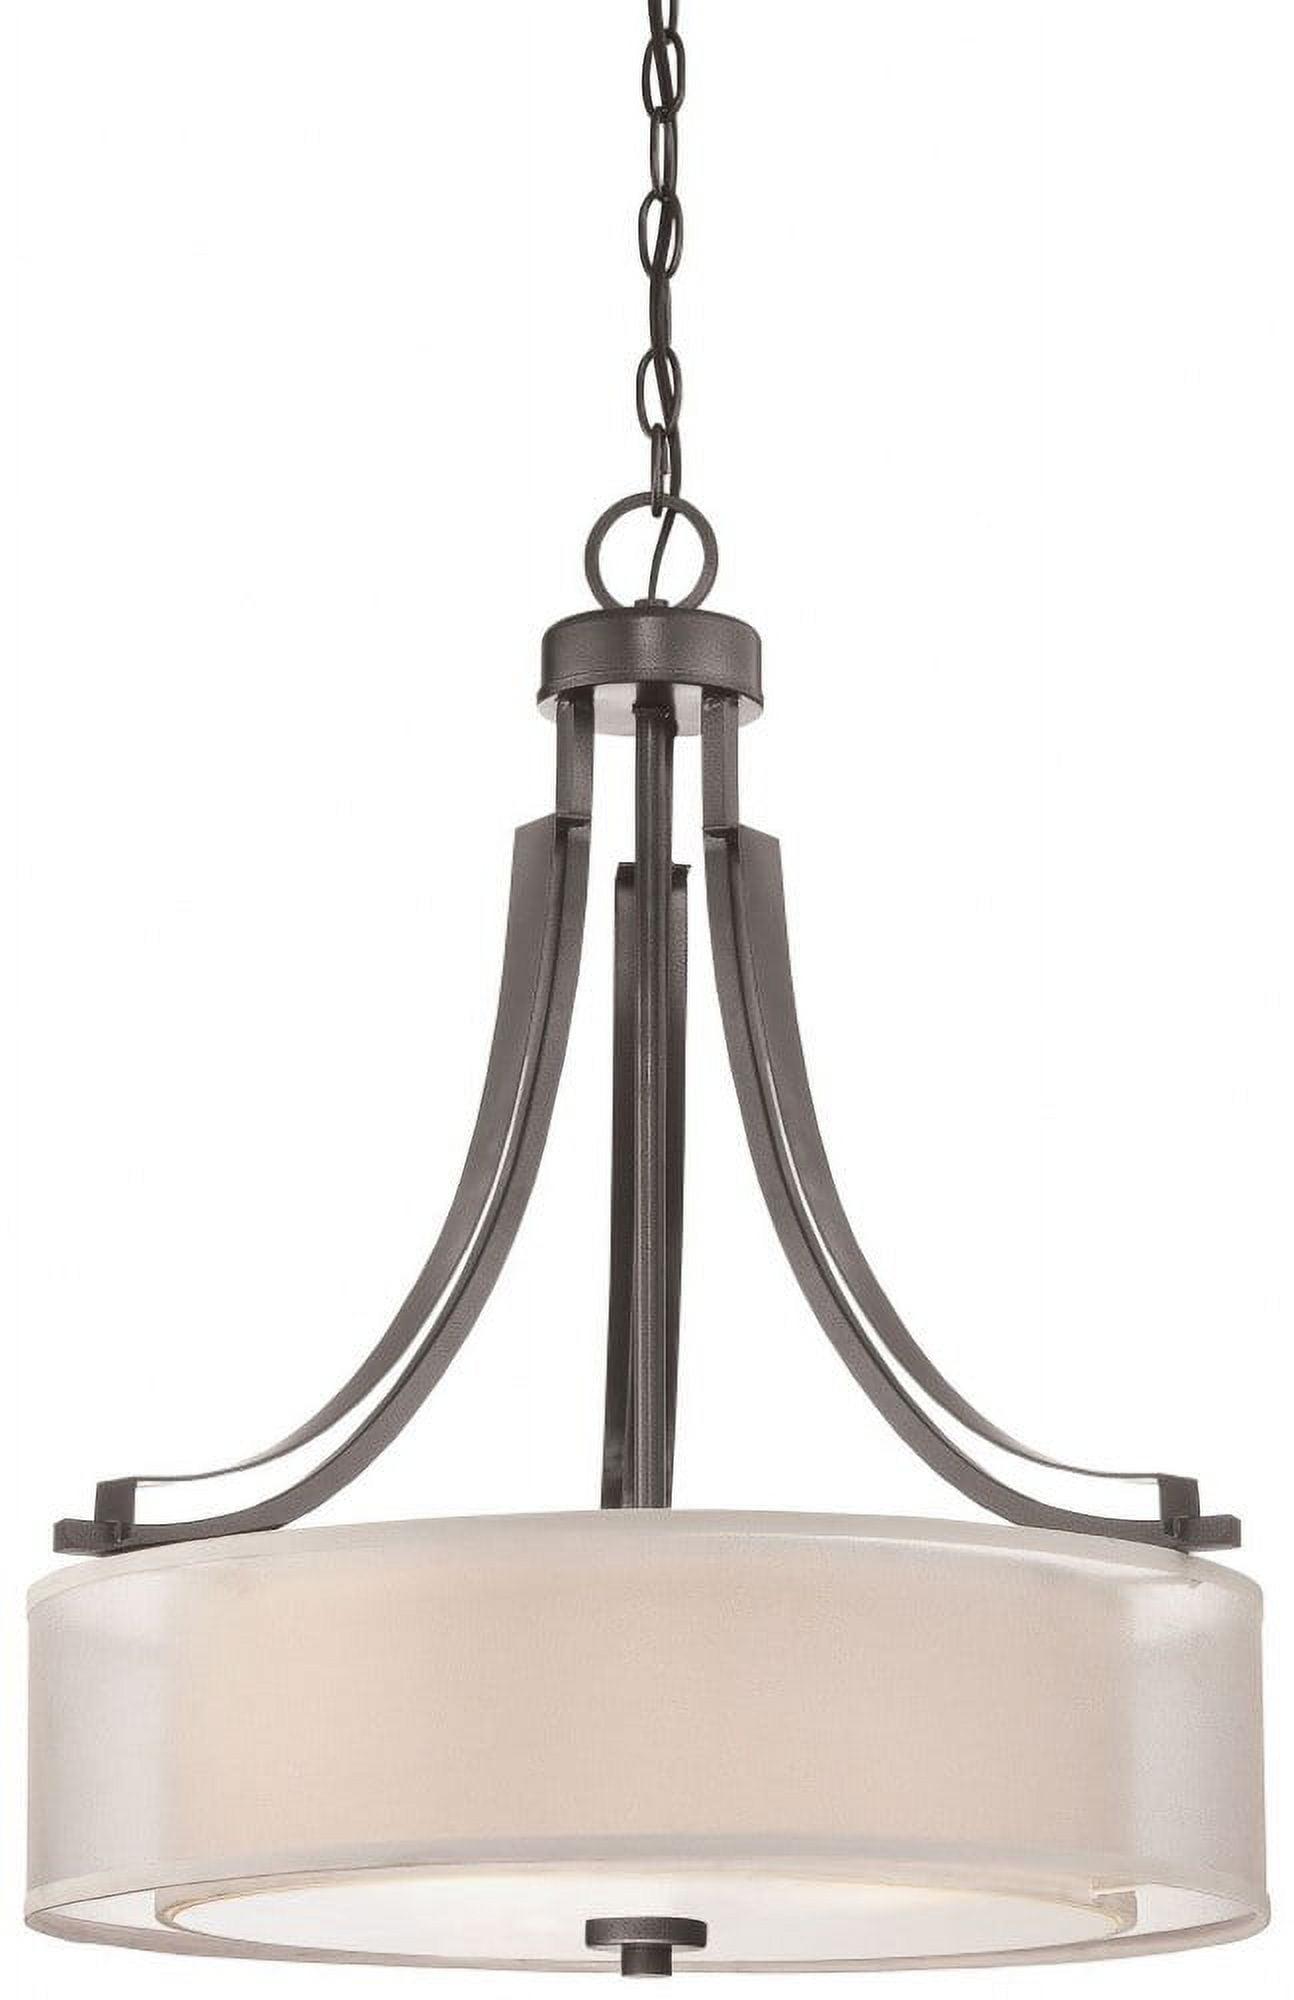 Parsons Studio Smoked Iron 3-Light Drum Pendant with Polished Nickel Accents